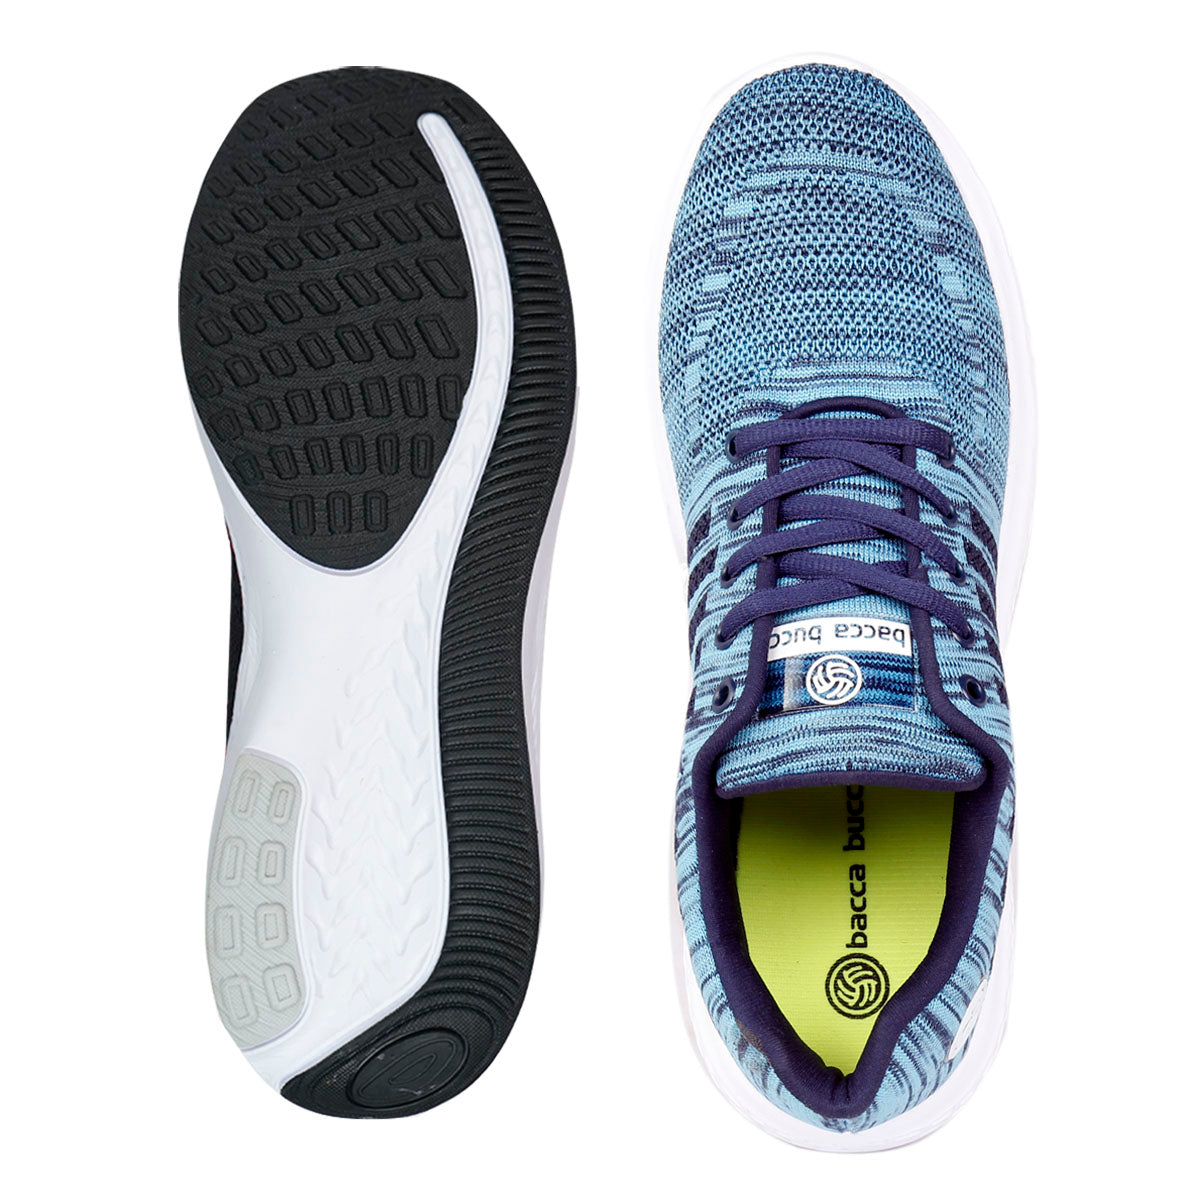 Bacca Bucci PROJECT PLUS Running Walking Training Gym Shoes Specially developed for wide and Large Foots | Only Big Sizes Available | UK-11 to 15